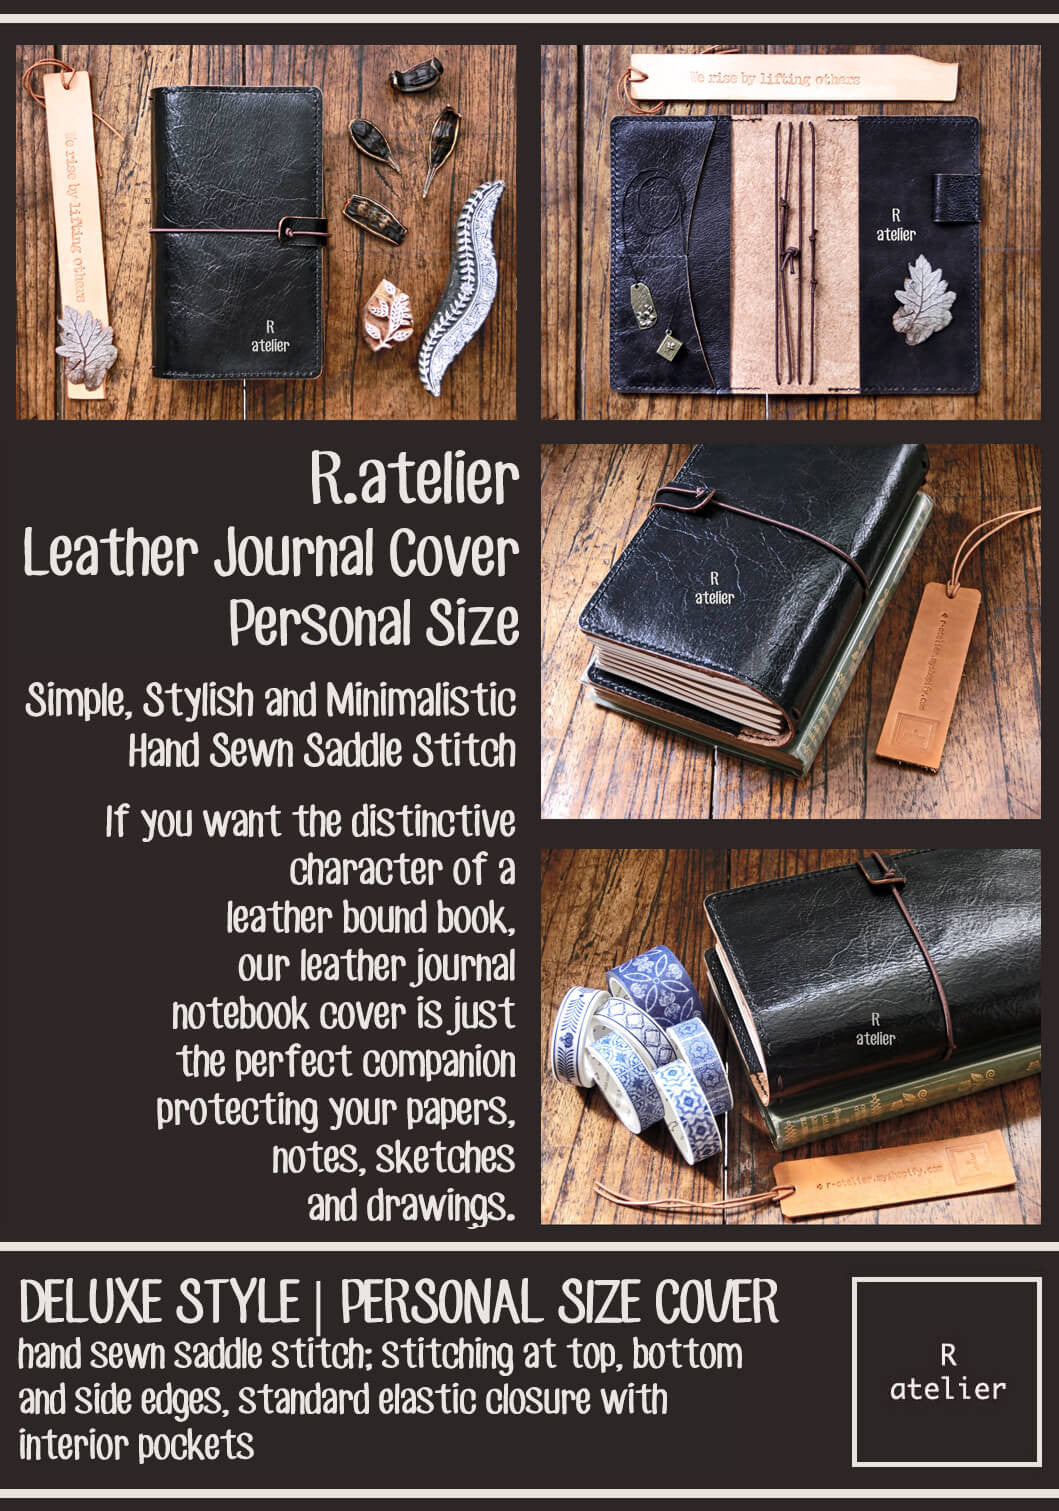 R.atelier Personal TN Leather Cover | Jet Black